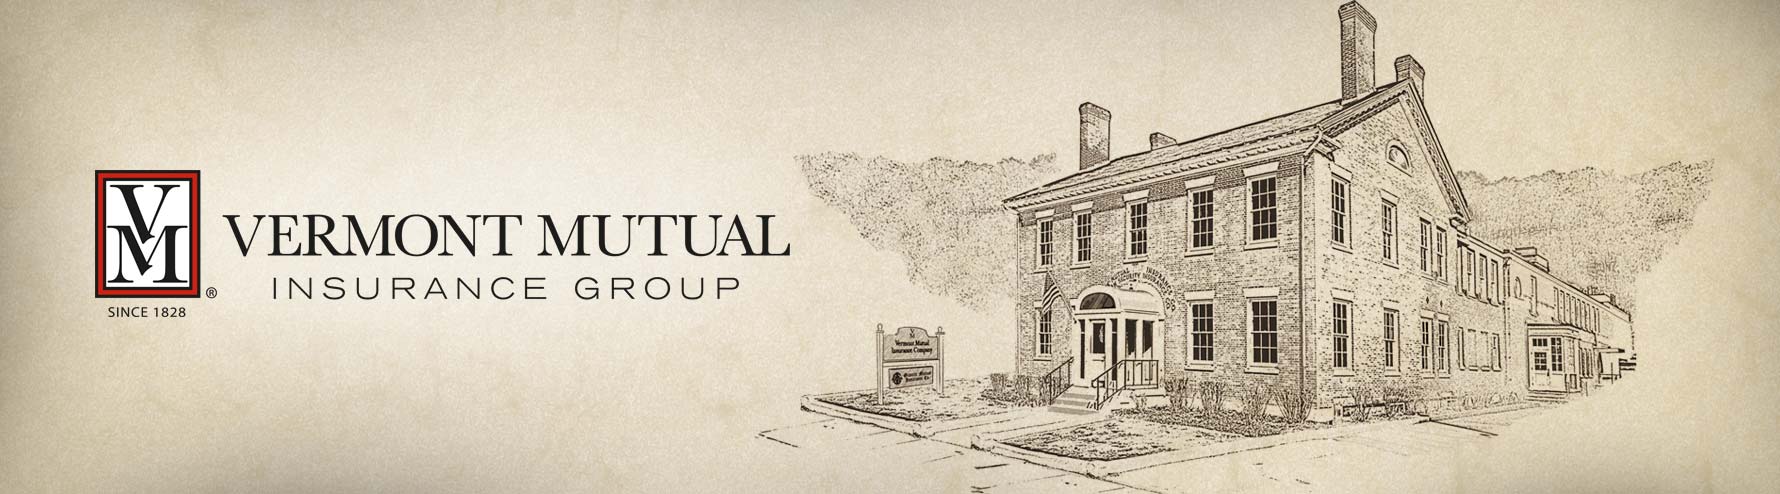 drawing of Vermont Mutual Insurance Group building